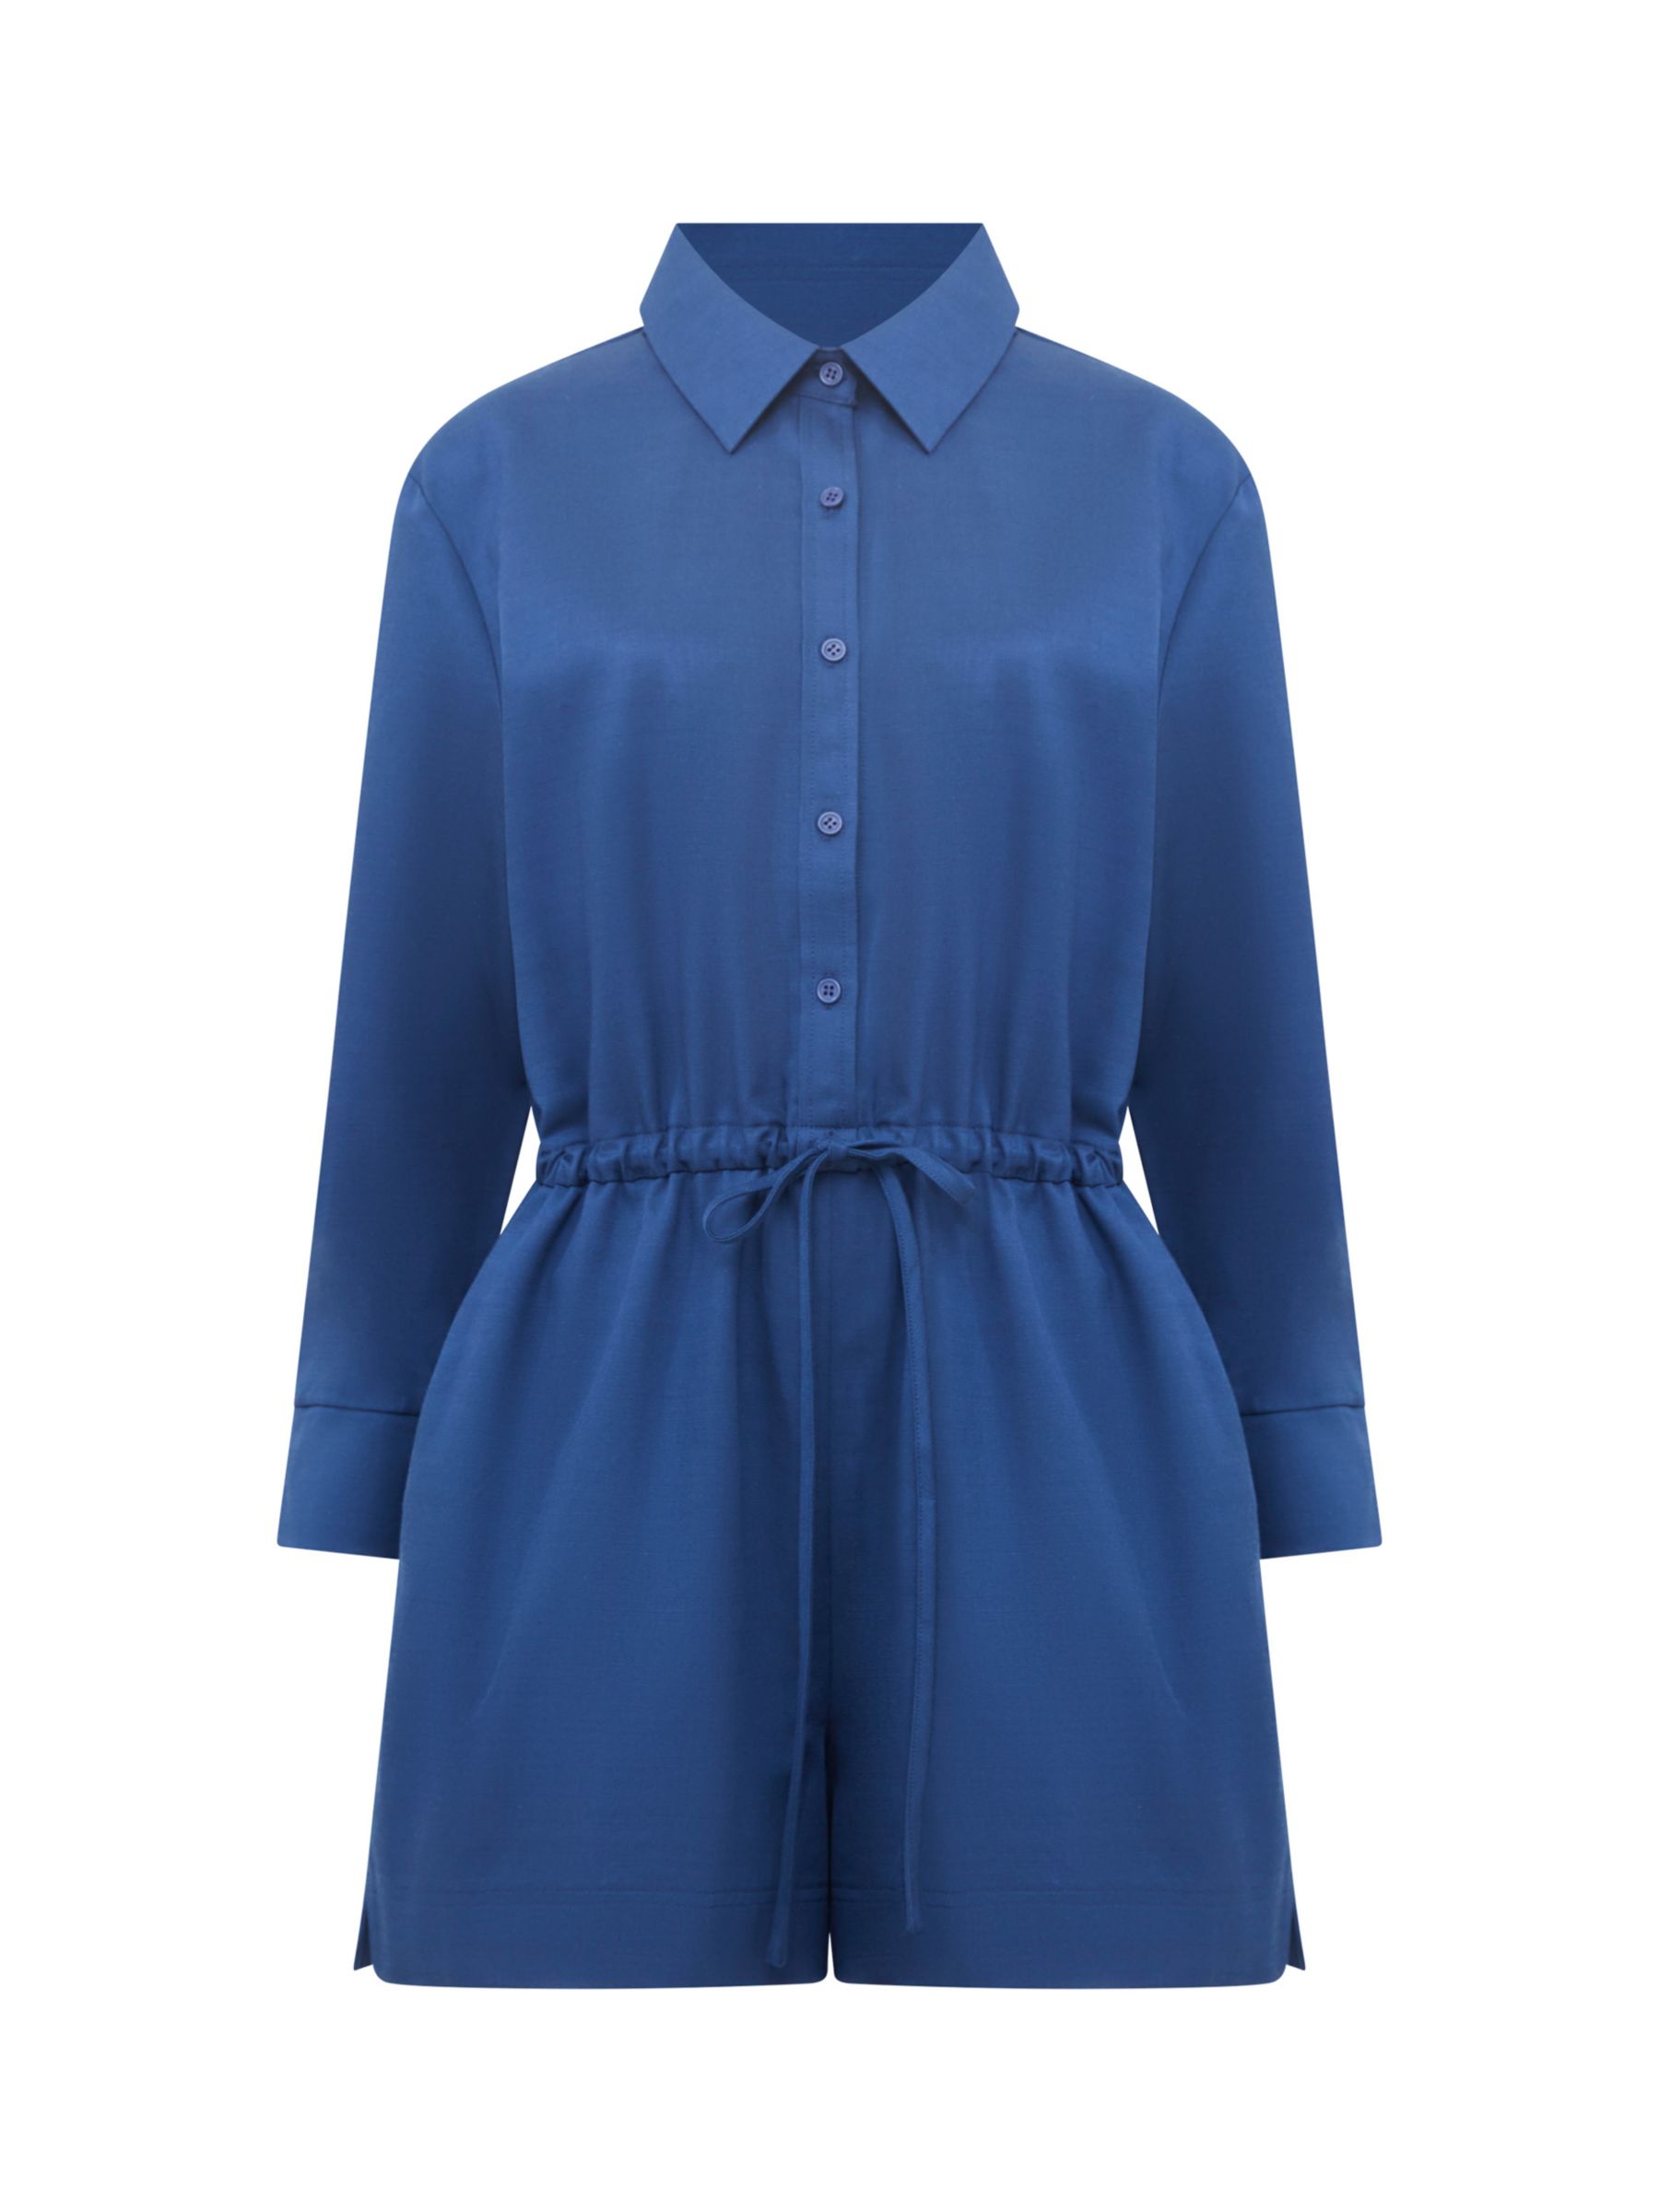 French Connection Bodie Shirt Playsuit, Midnight Blue, S